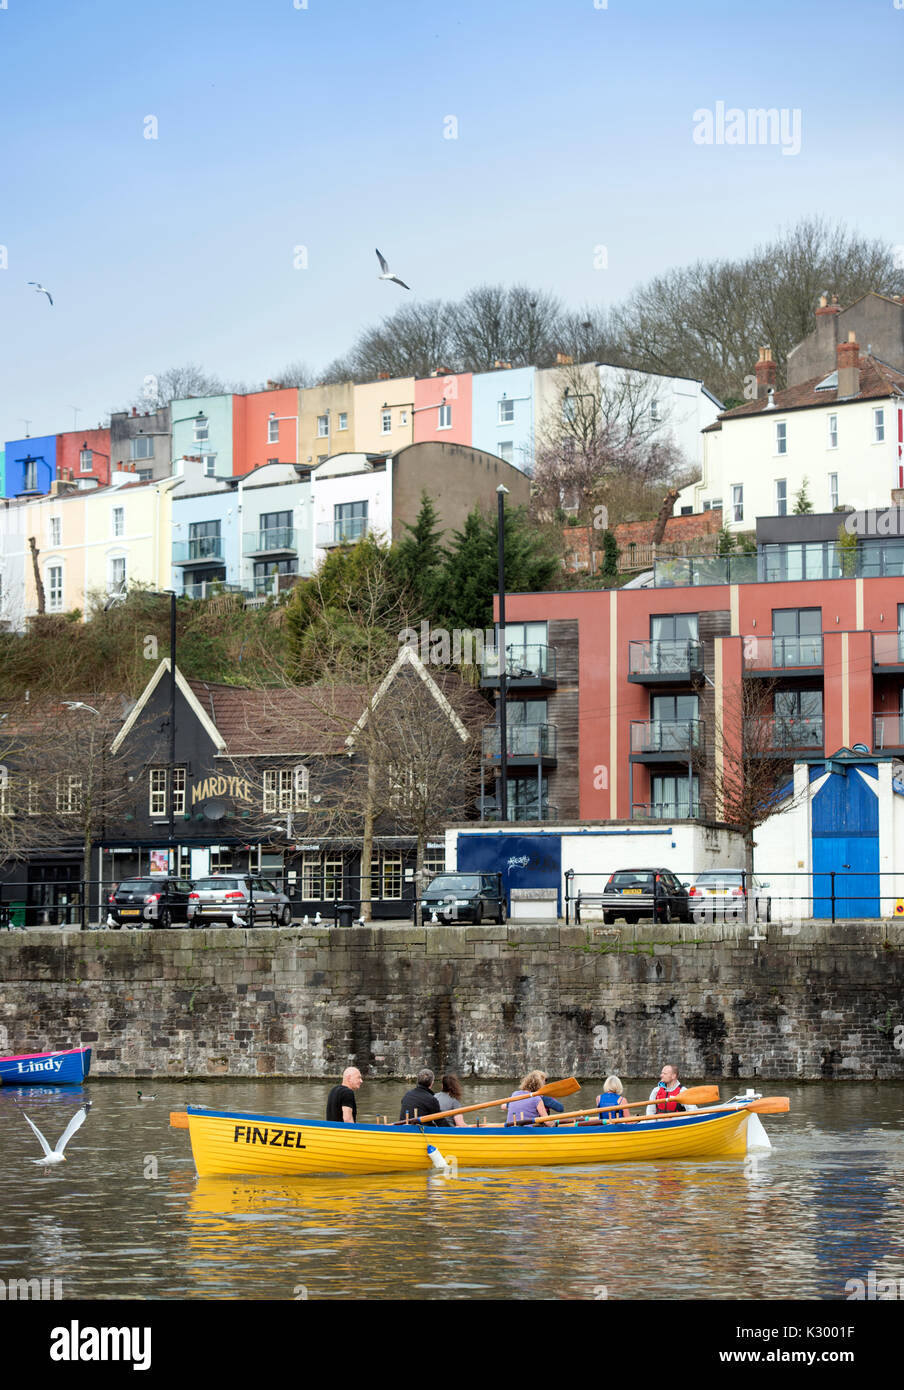 Gig rowers in the docks at Hotwells in Bristol Docks Stock Photo